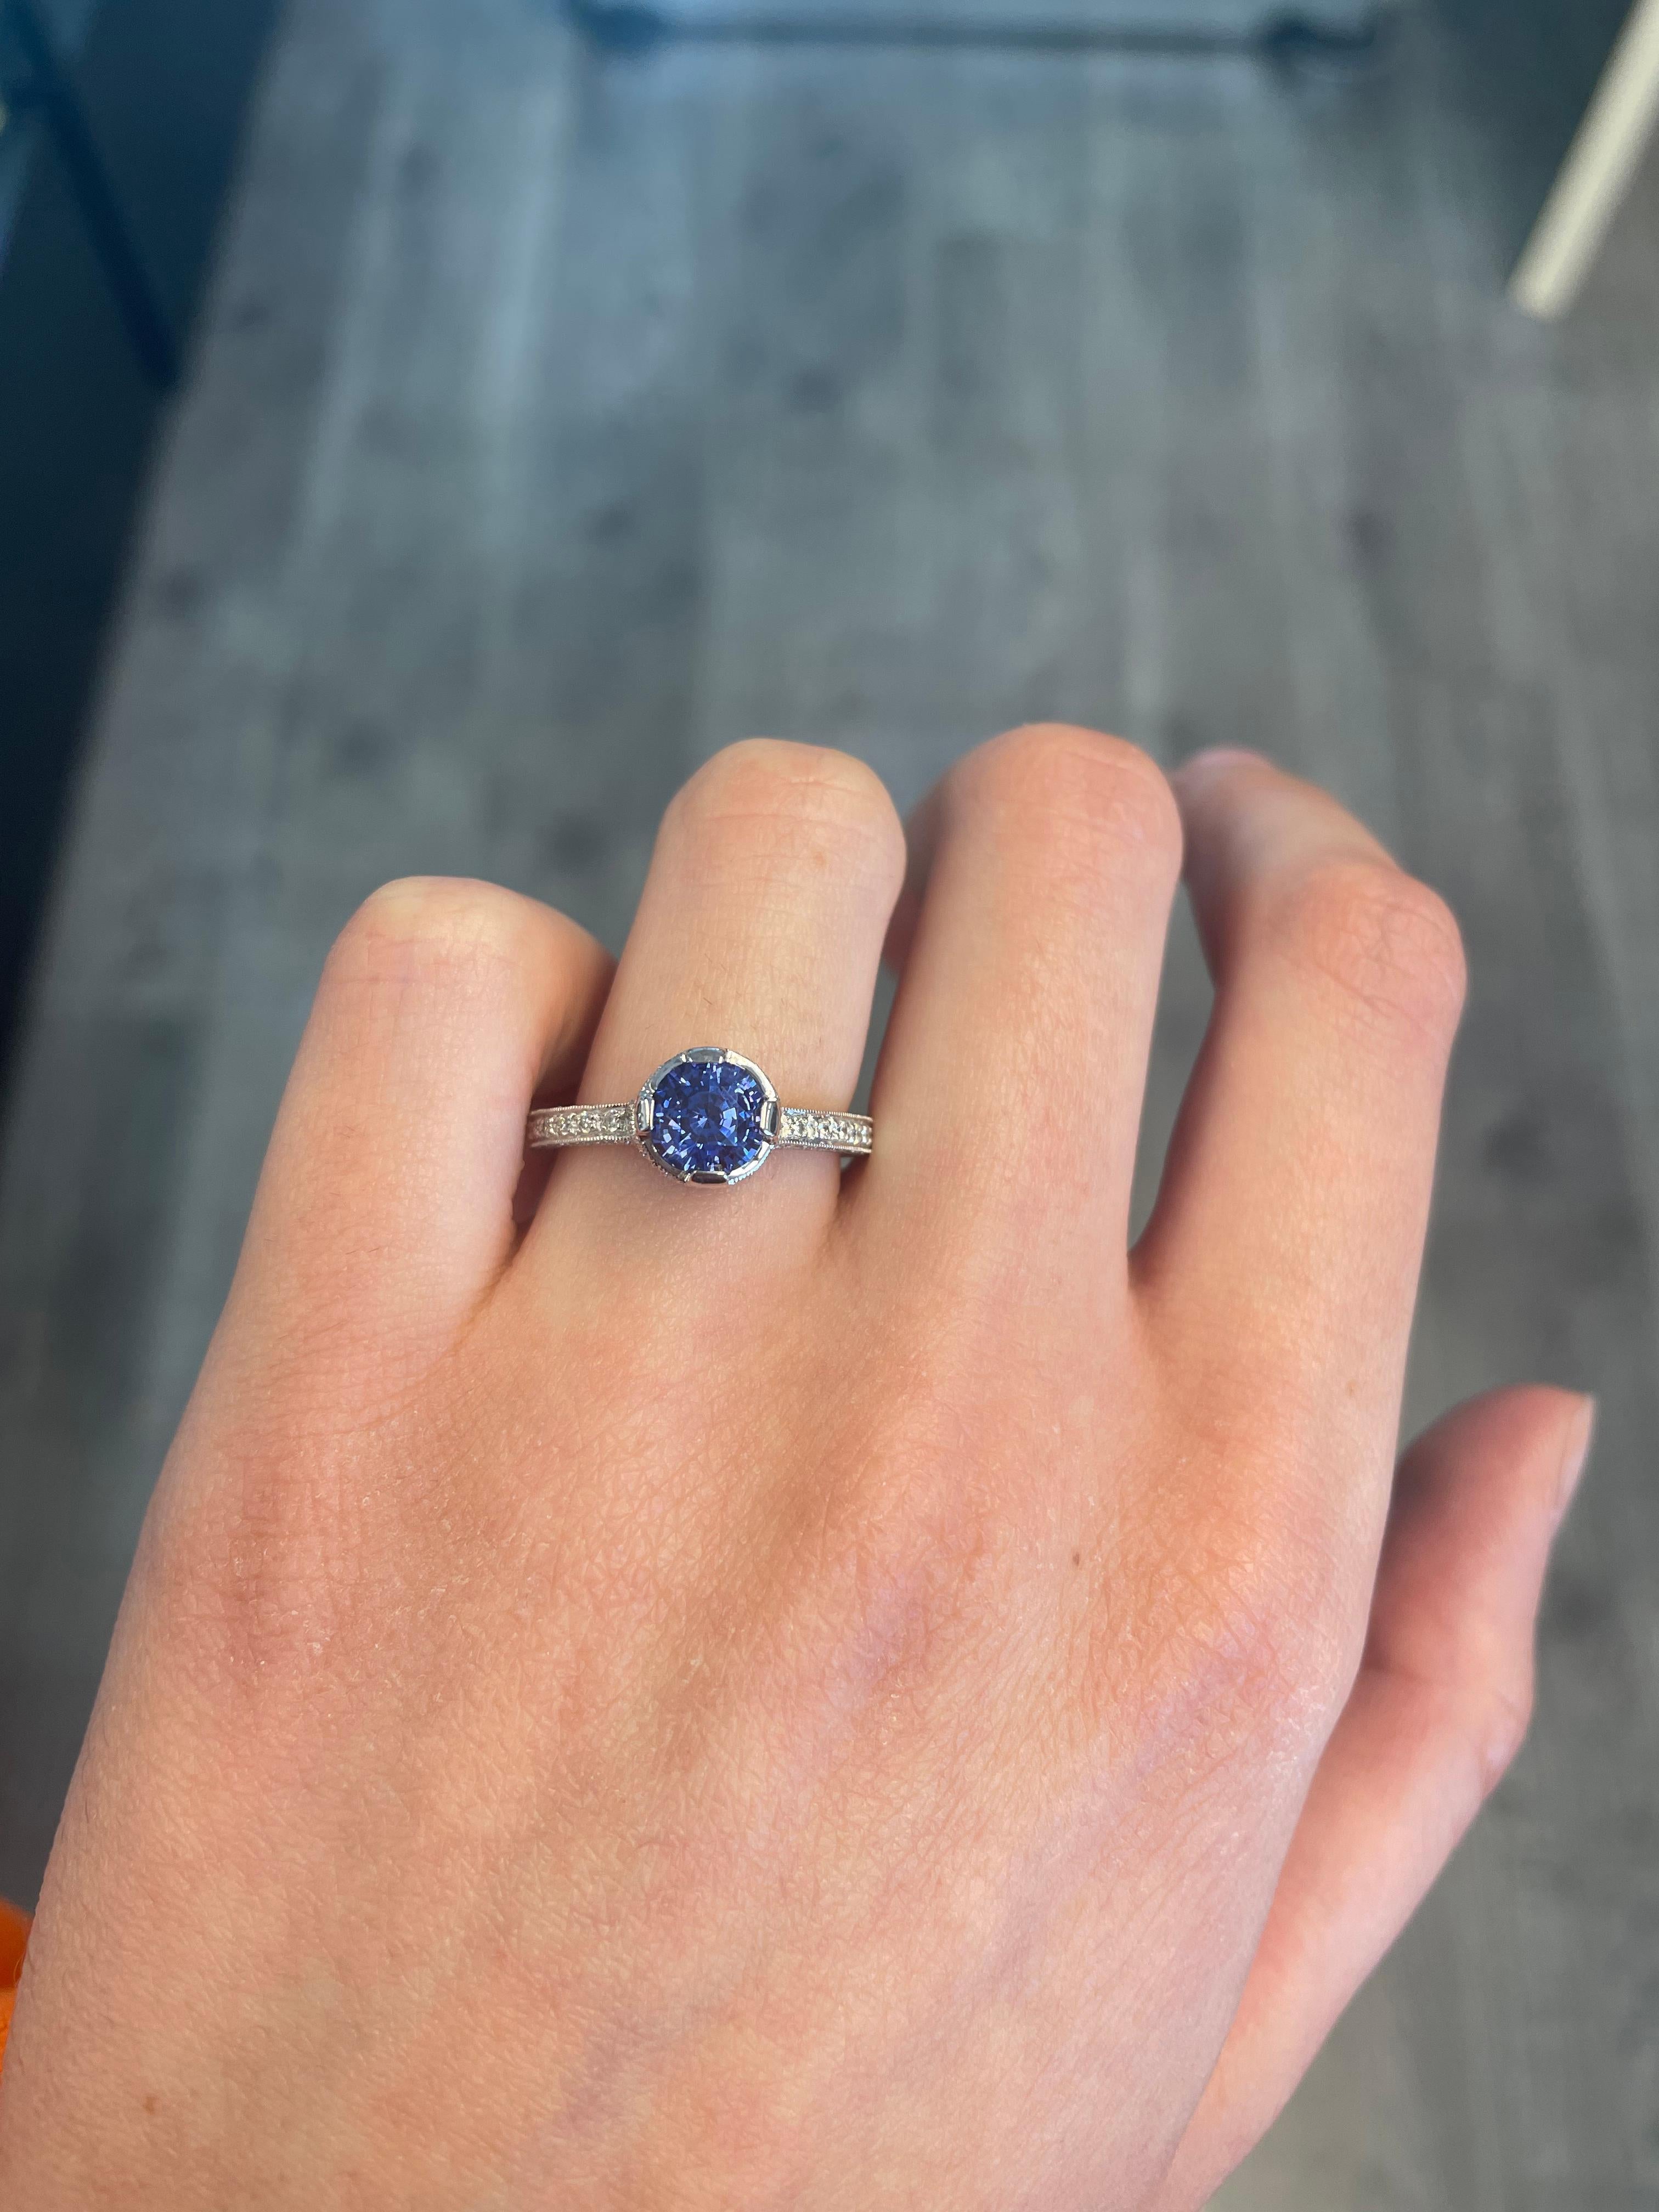 Art Deco style round Ceylon sapphire ring with diamonds.
2.27 carats total gemstone weight.
Center 1.56 carat round Sri Lankan sapphire, heat. Complimented with 0.71 carats of round brilliant diamonds, approximately G/H color and SI clarity. 18k